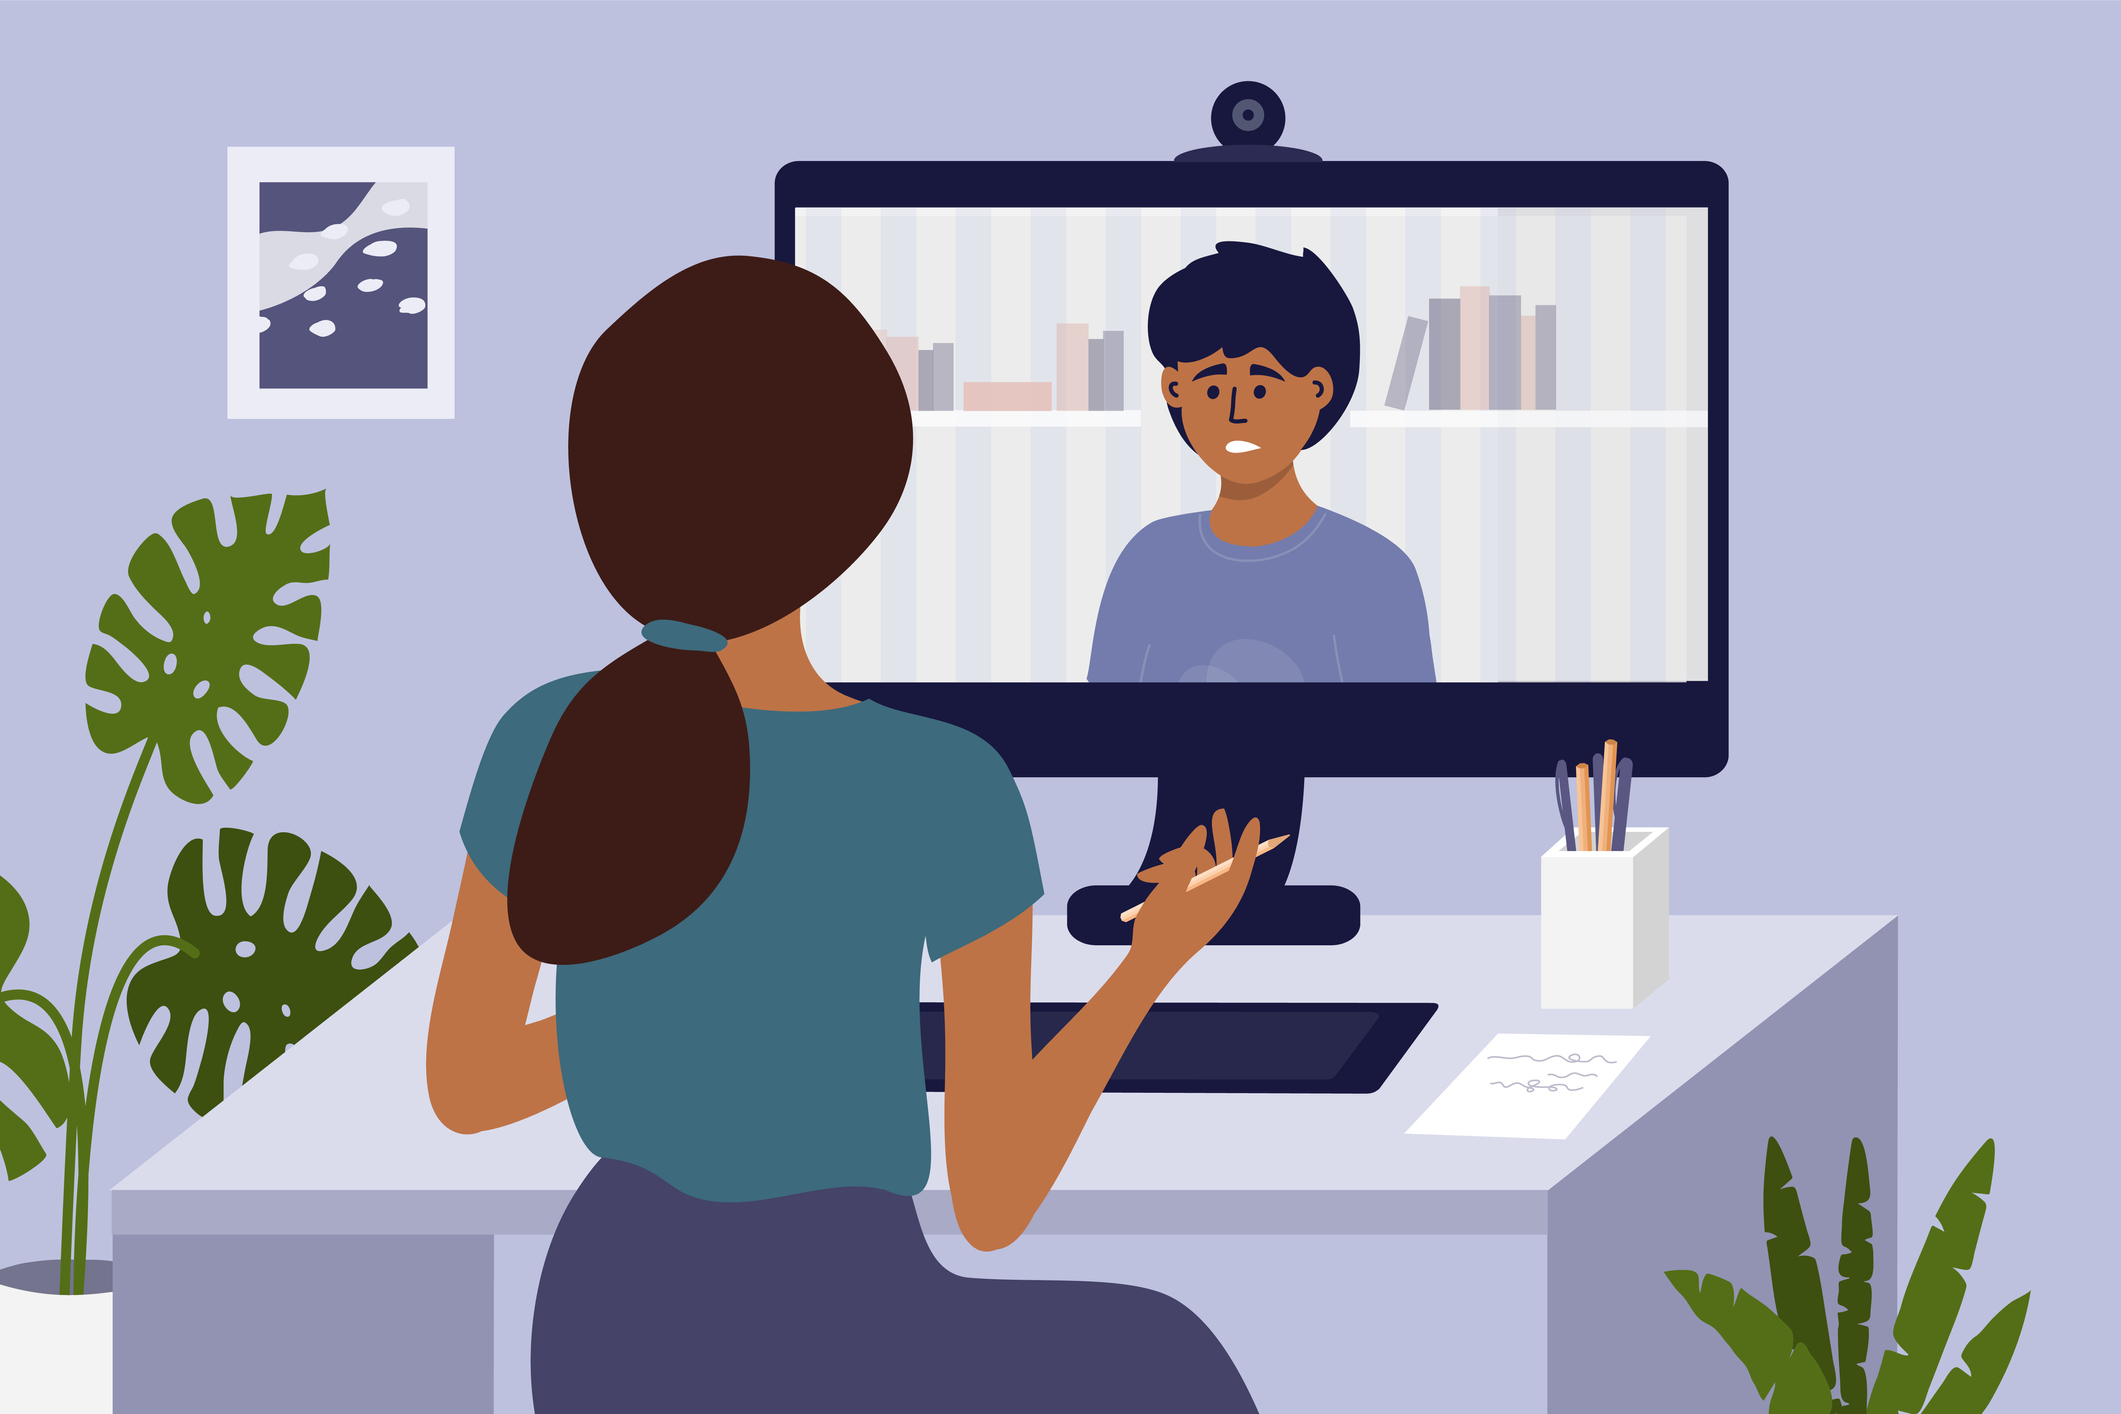 A vector image of a distraught young man on a desktop computer screen looking directly at a woman who is sitting  providing him telehealth counseling services. She holds a pencil in her right hand. We only see the back of her head. There is a monstera floor plant to left of her desk.